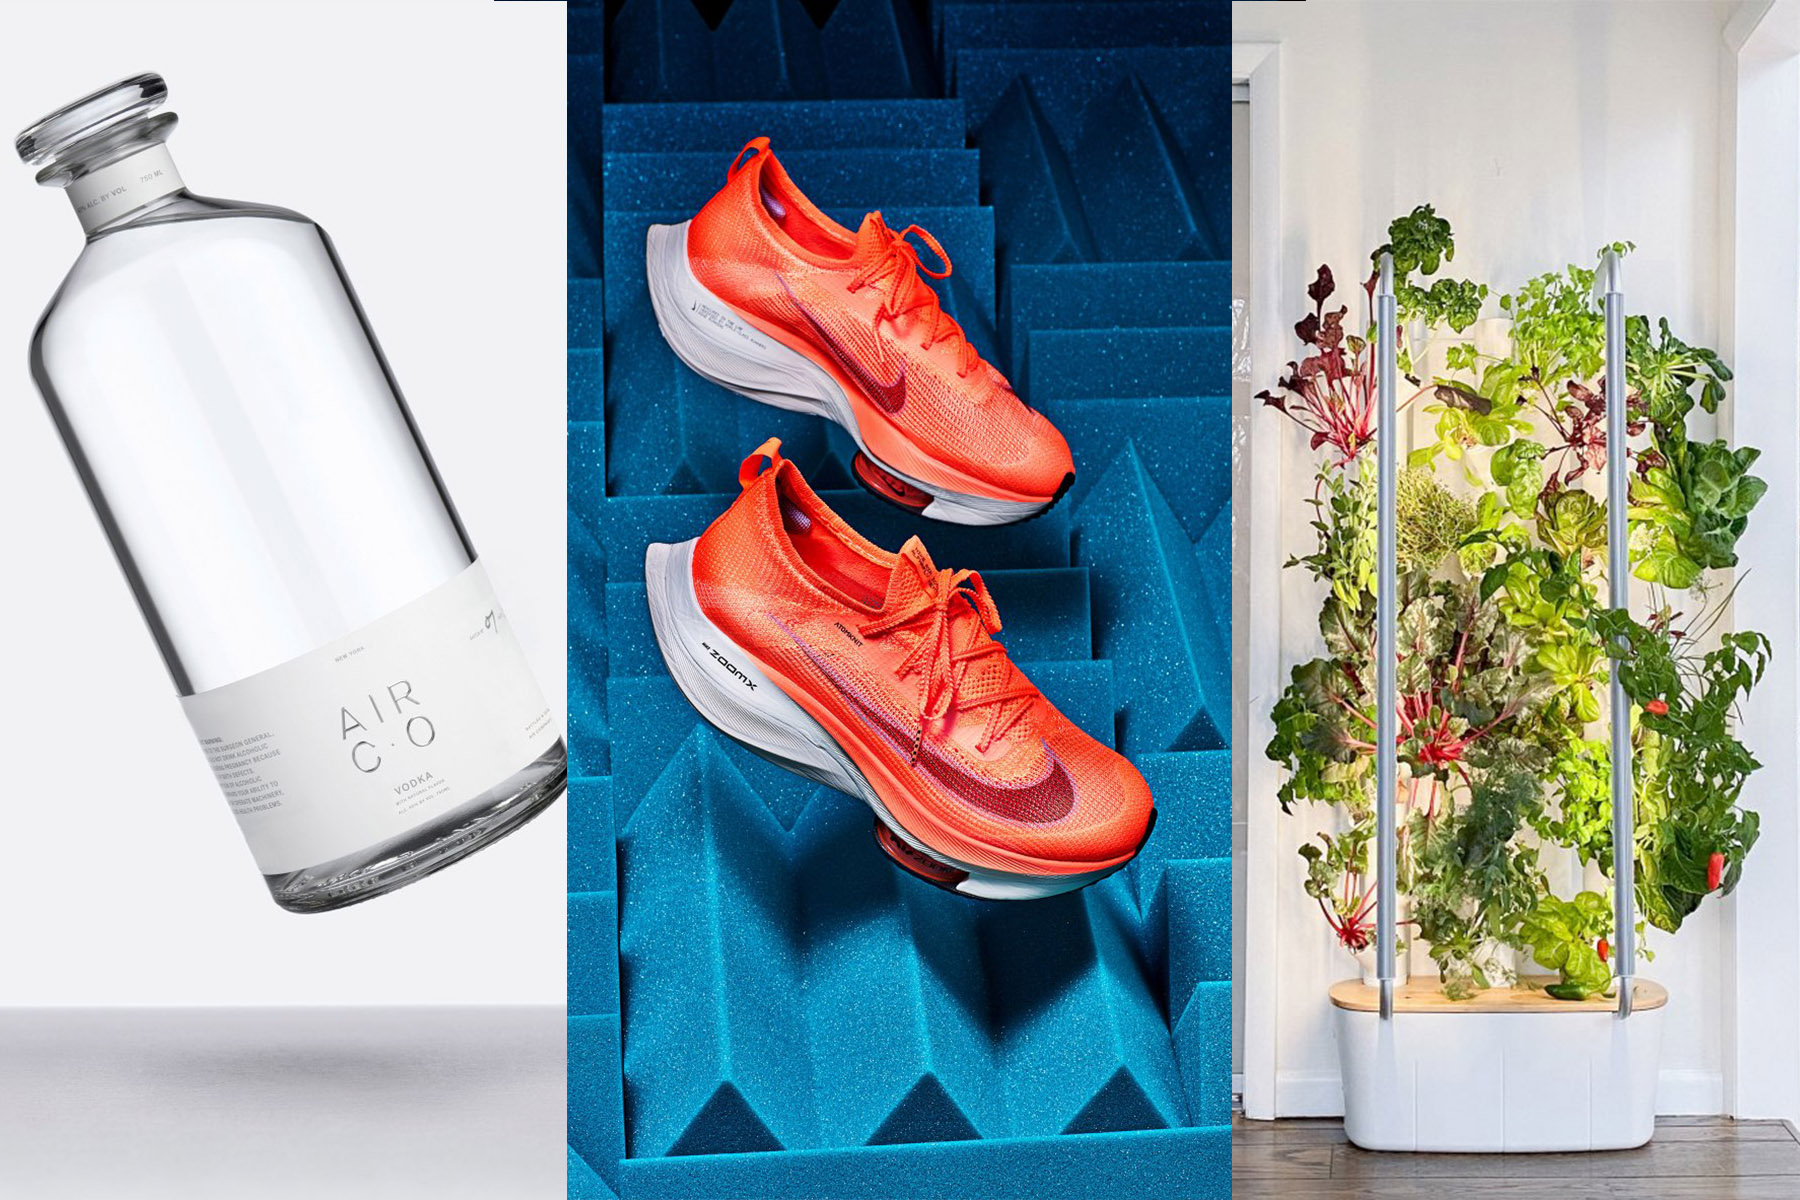 The Best Inventions of 2020 Air Vodka, Dyson Corrale, PS5 and more